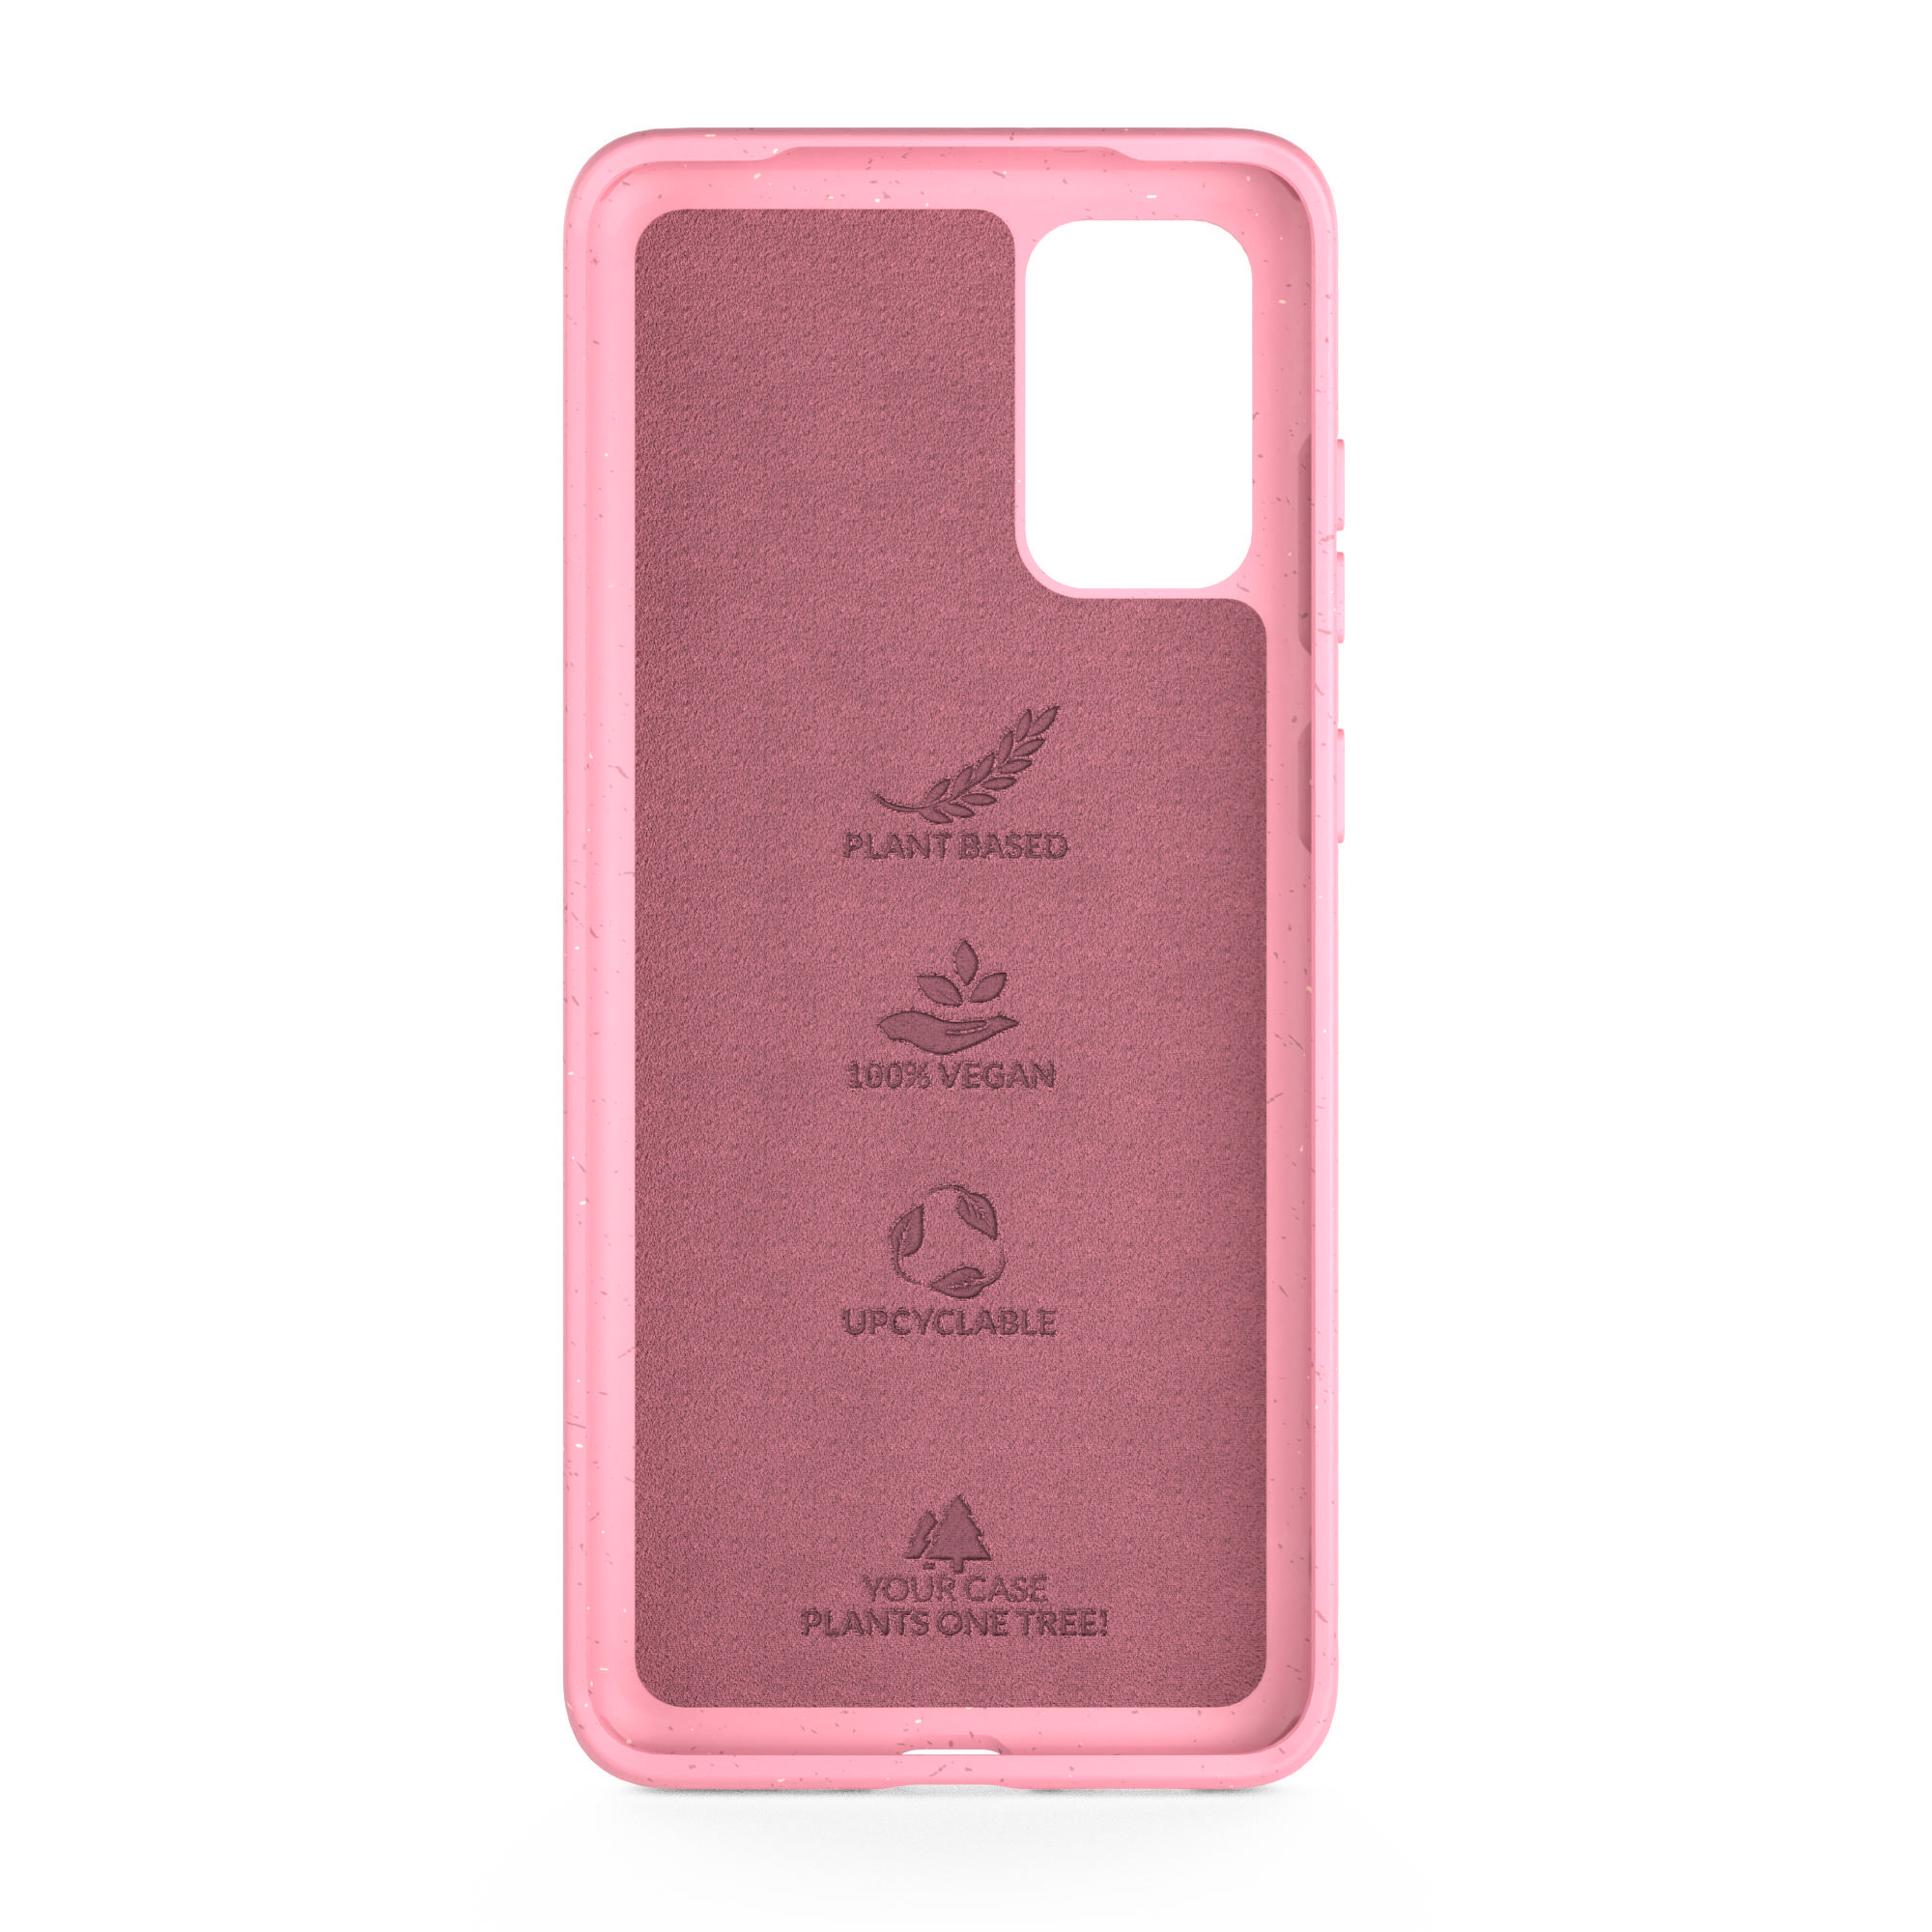 WOODCESSORIES Bio Case Antimicrobial, Samsung, Backcover, S20+, Pink Galaxy